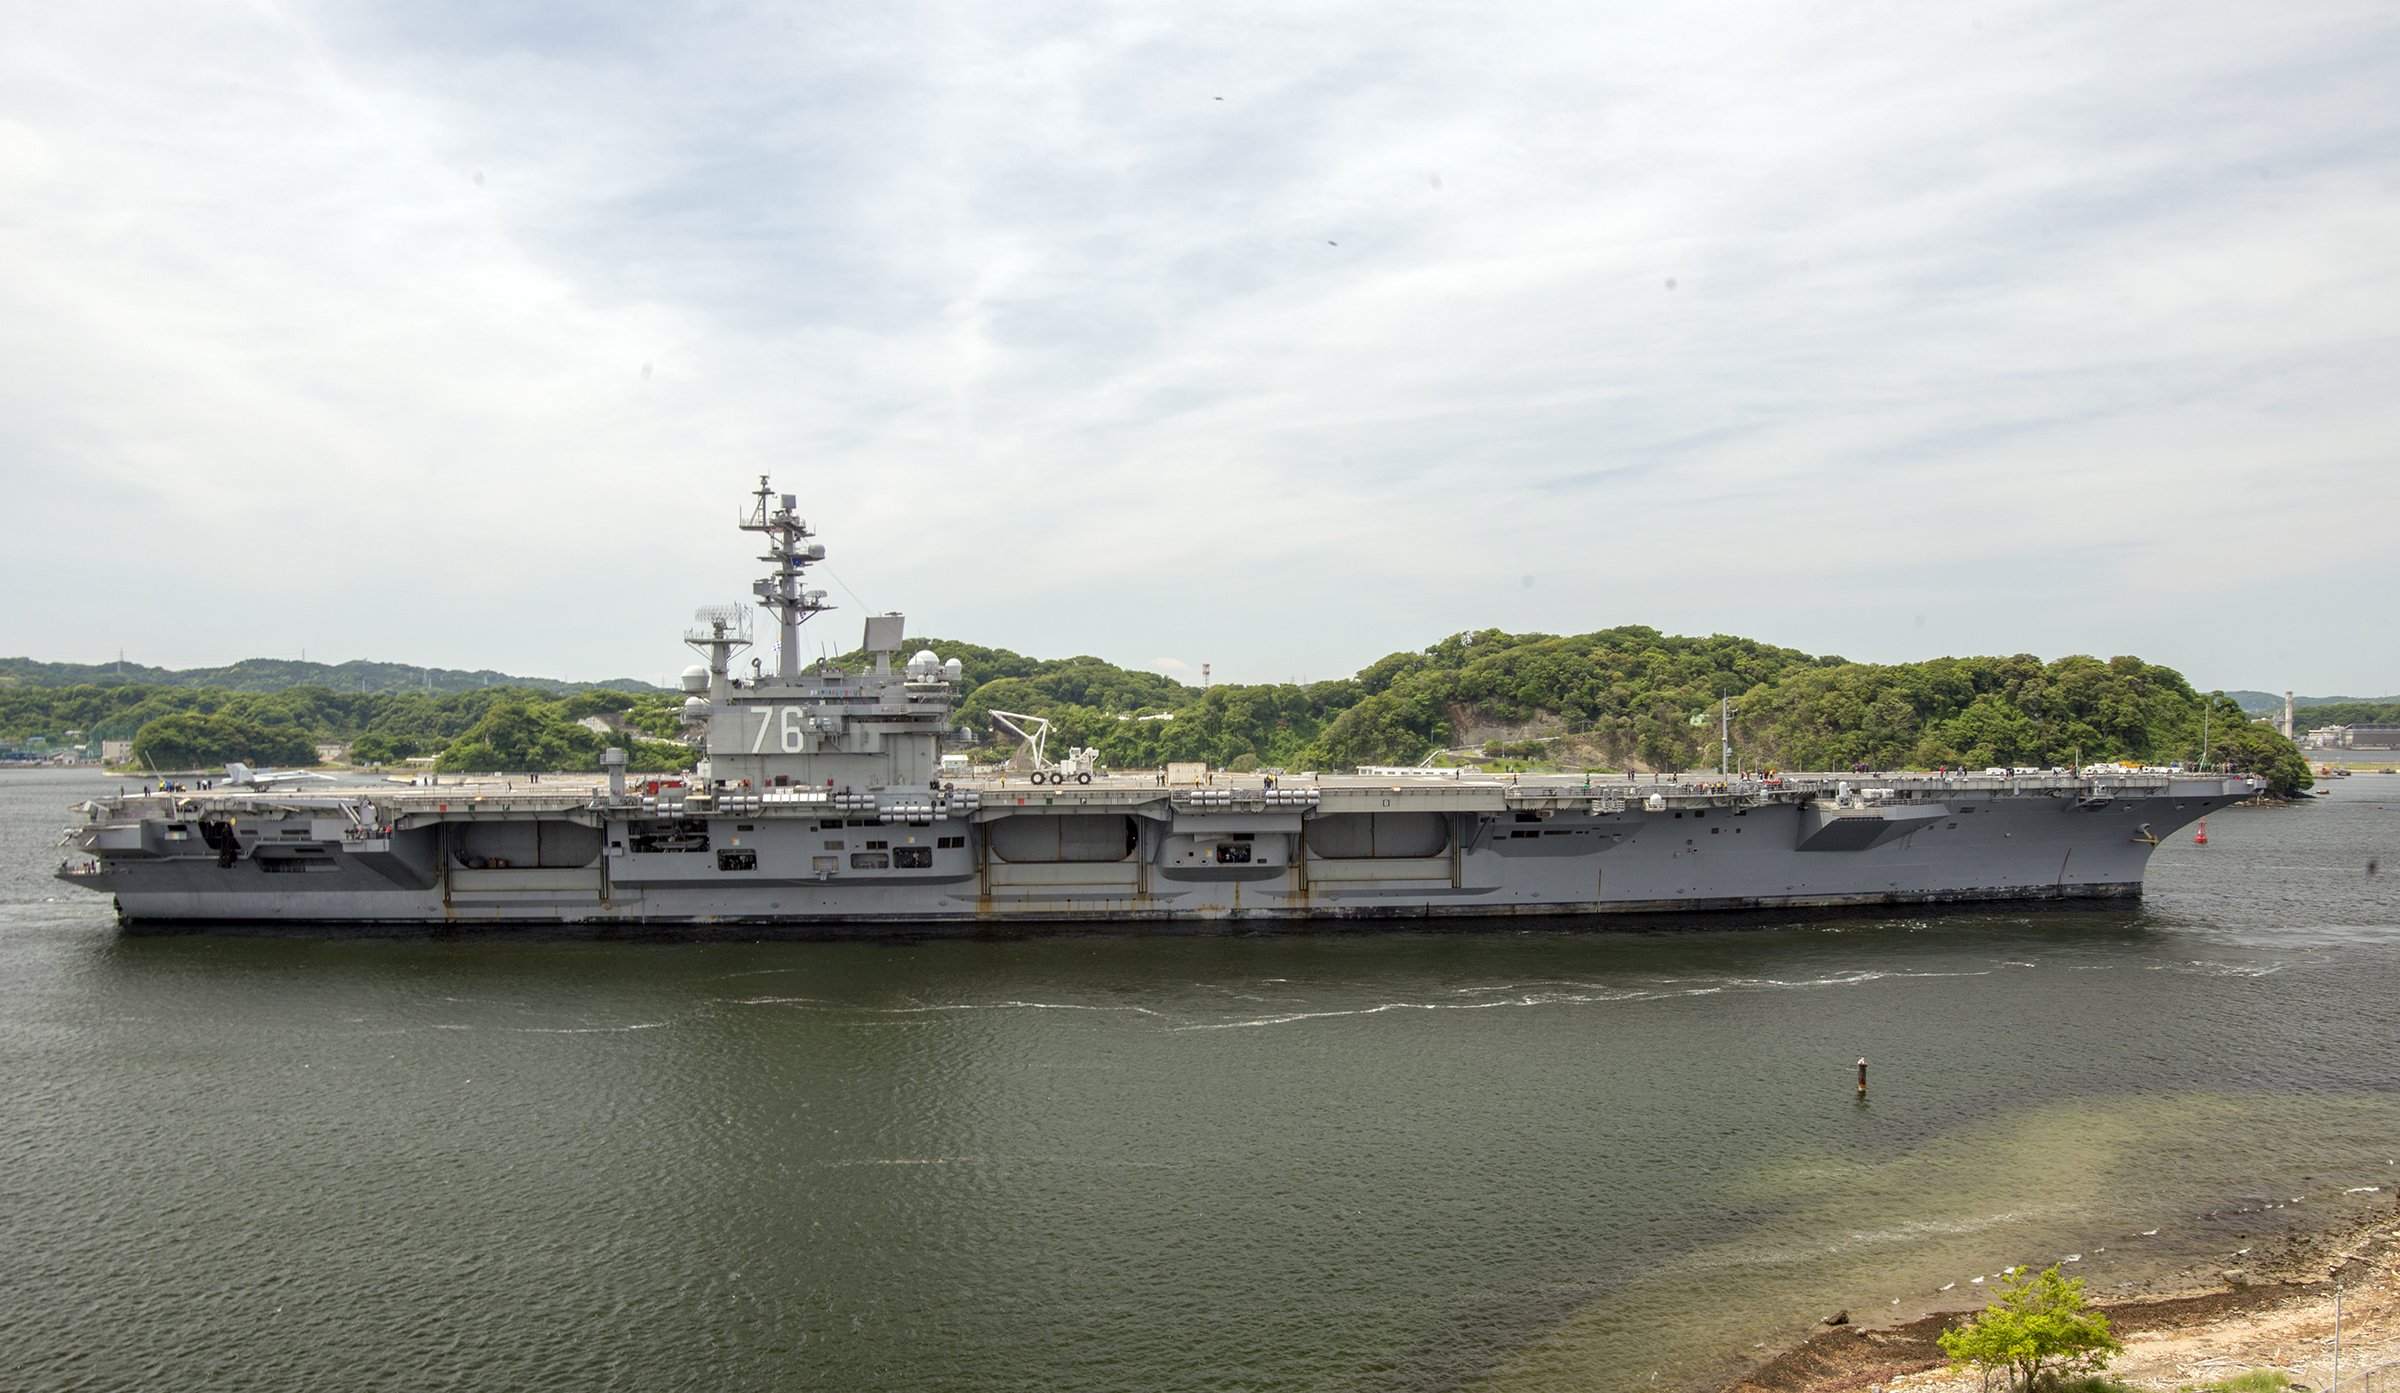 YOKOSUKA, Japan (May 11, 2018) The aircraft carrier USS Ronald Reagan (CVN 76) departs U.S. Fleet Activities (FLEACT) Yokosuka. FLEACT Yokosuka provides, maintains and operates base facilities and services in support of the U.S. 7th Fleet's forward-deployed naval forces, 71 tenant commands and more than 27,000 military and civilian personnel. U.S. Navy photo by Garrett Zopfi. -